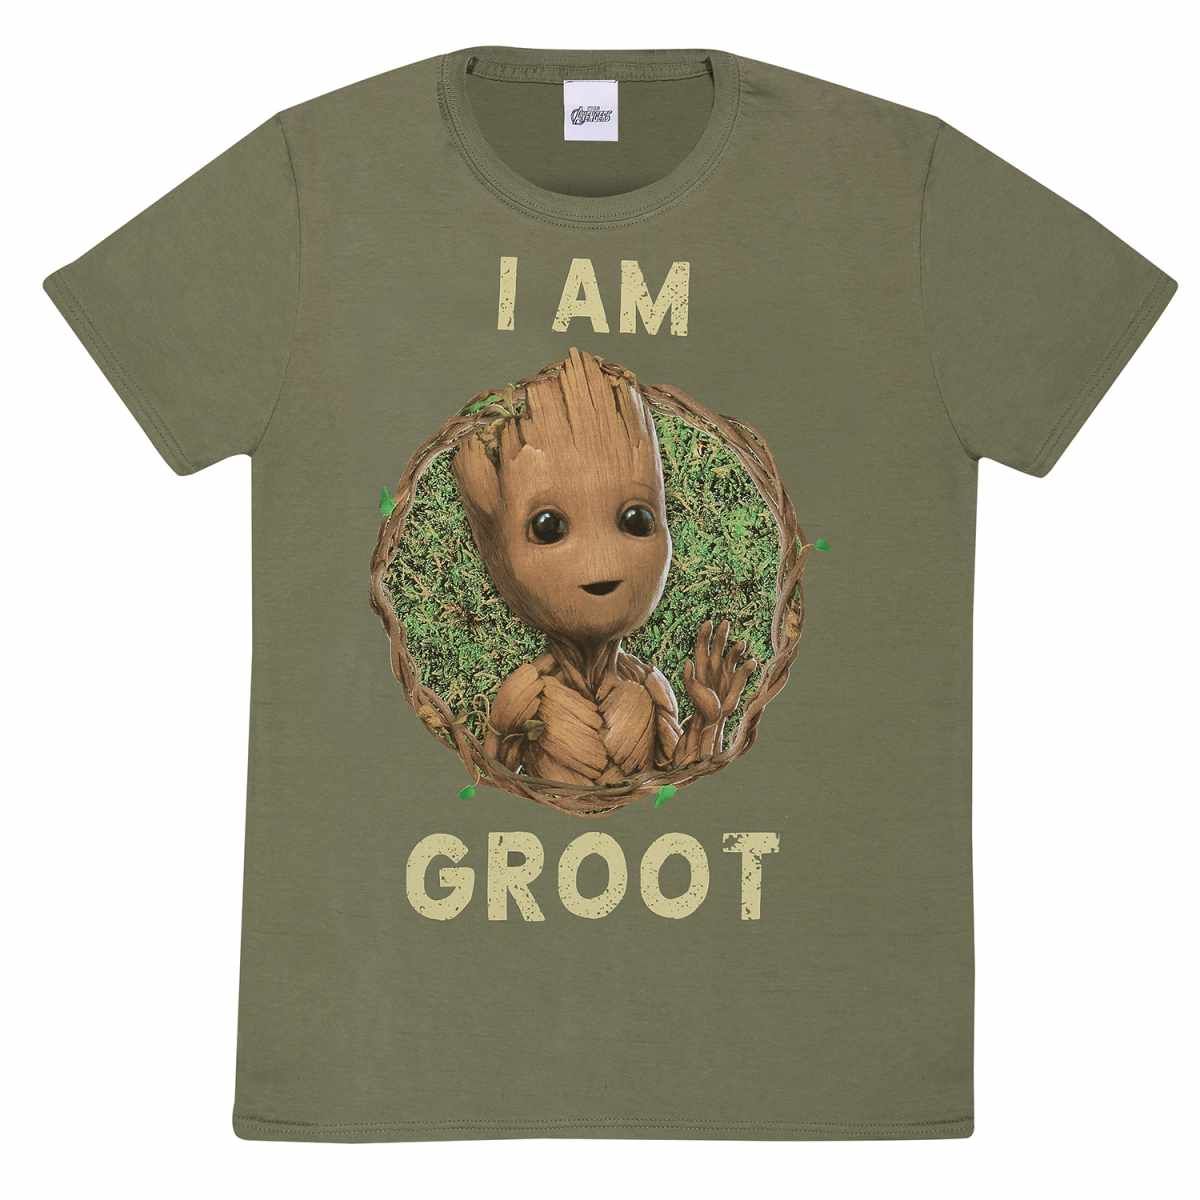 Buy Your Guardians Of The Galaxy I Am Groot T-Shirt (Free Shipping) -  Merchoid